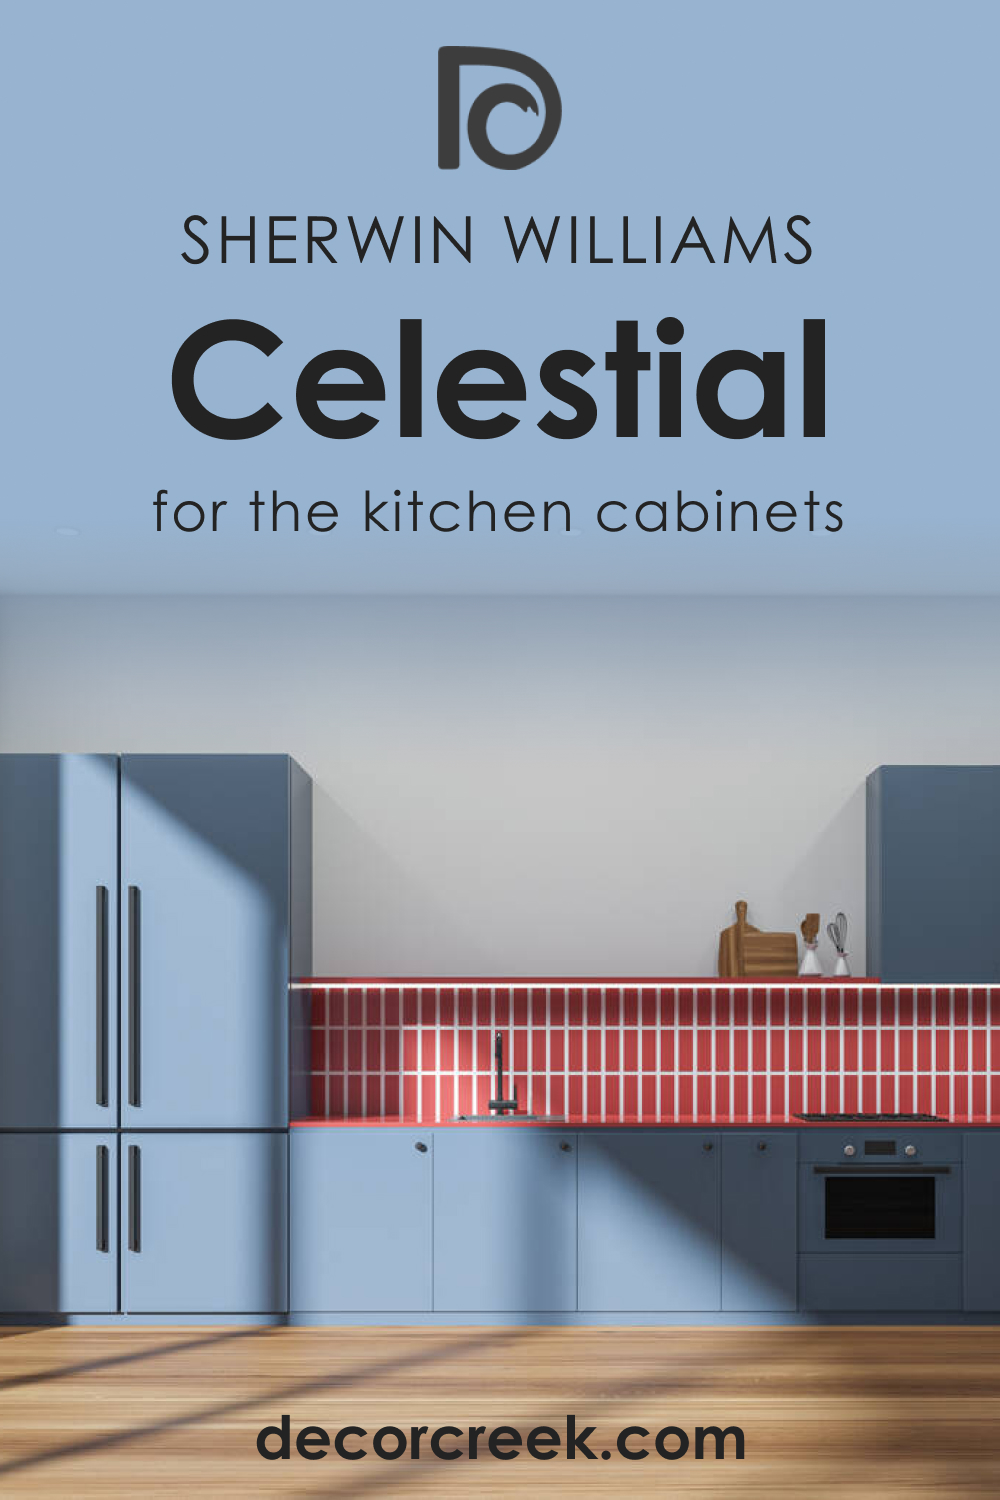 How to Use SW 6808 Celestial for the Kitchen Cabinets?